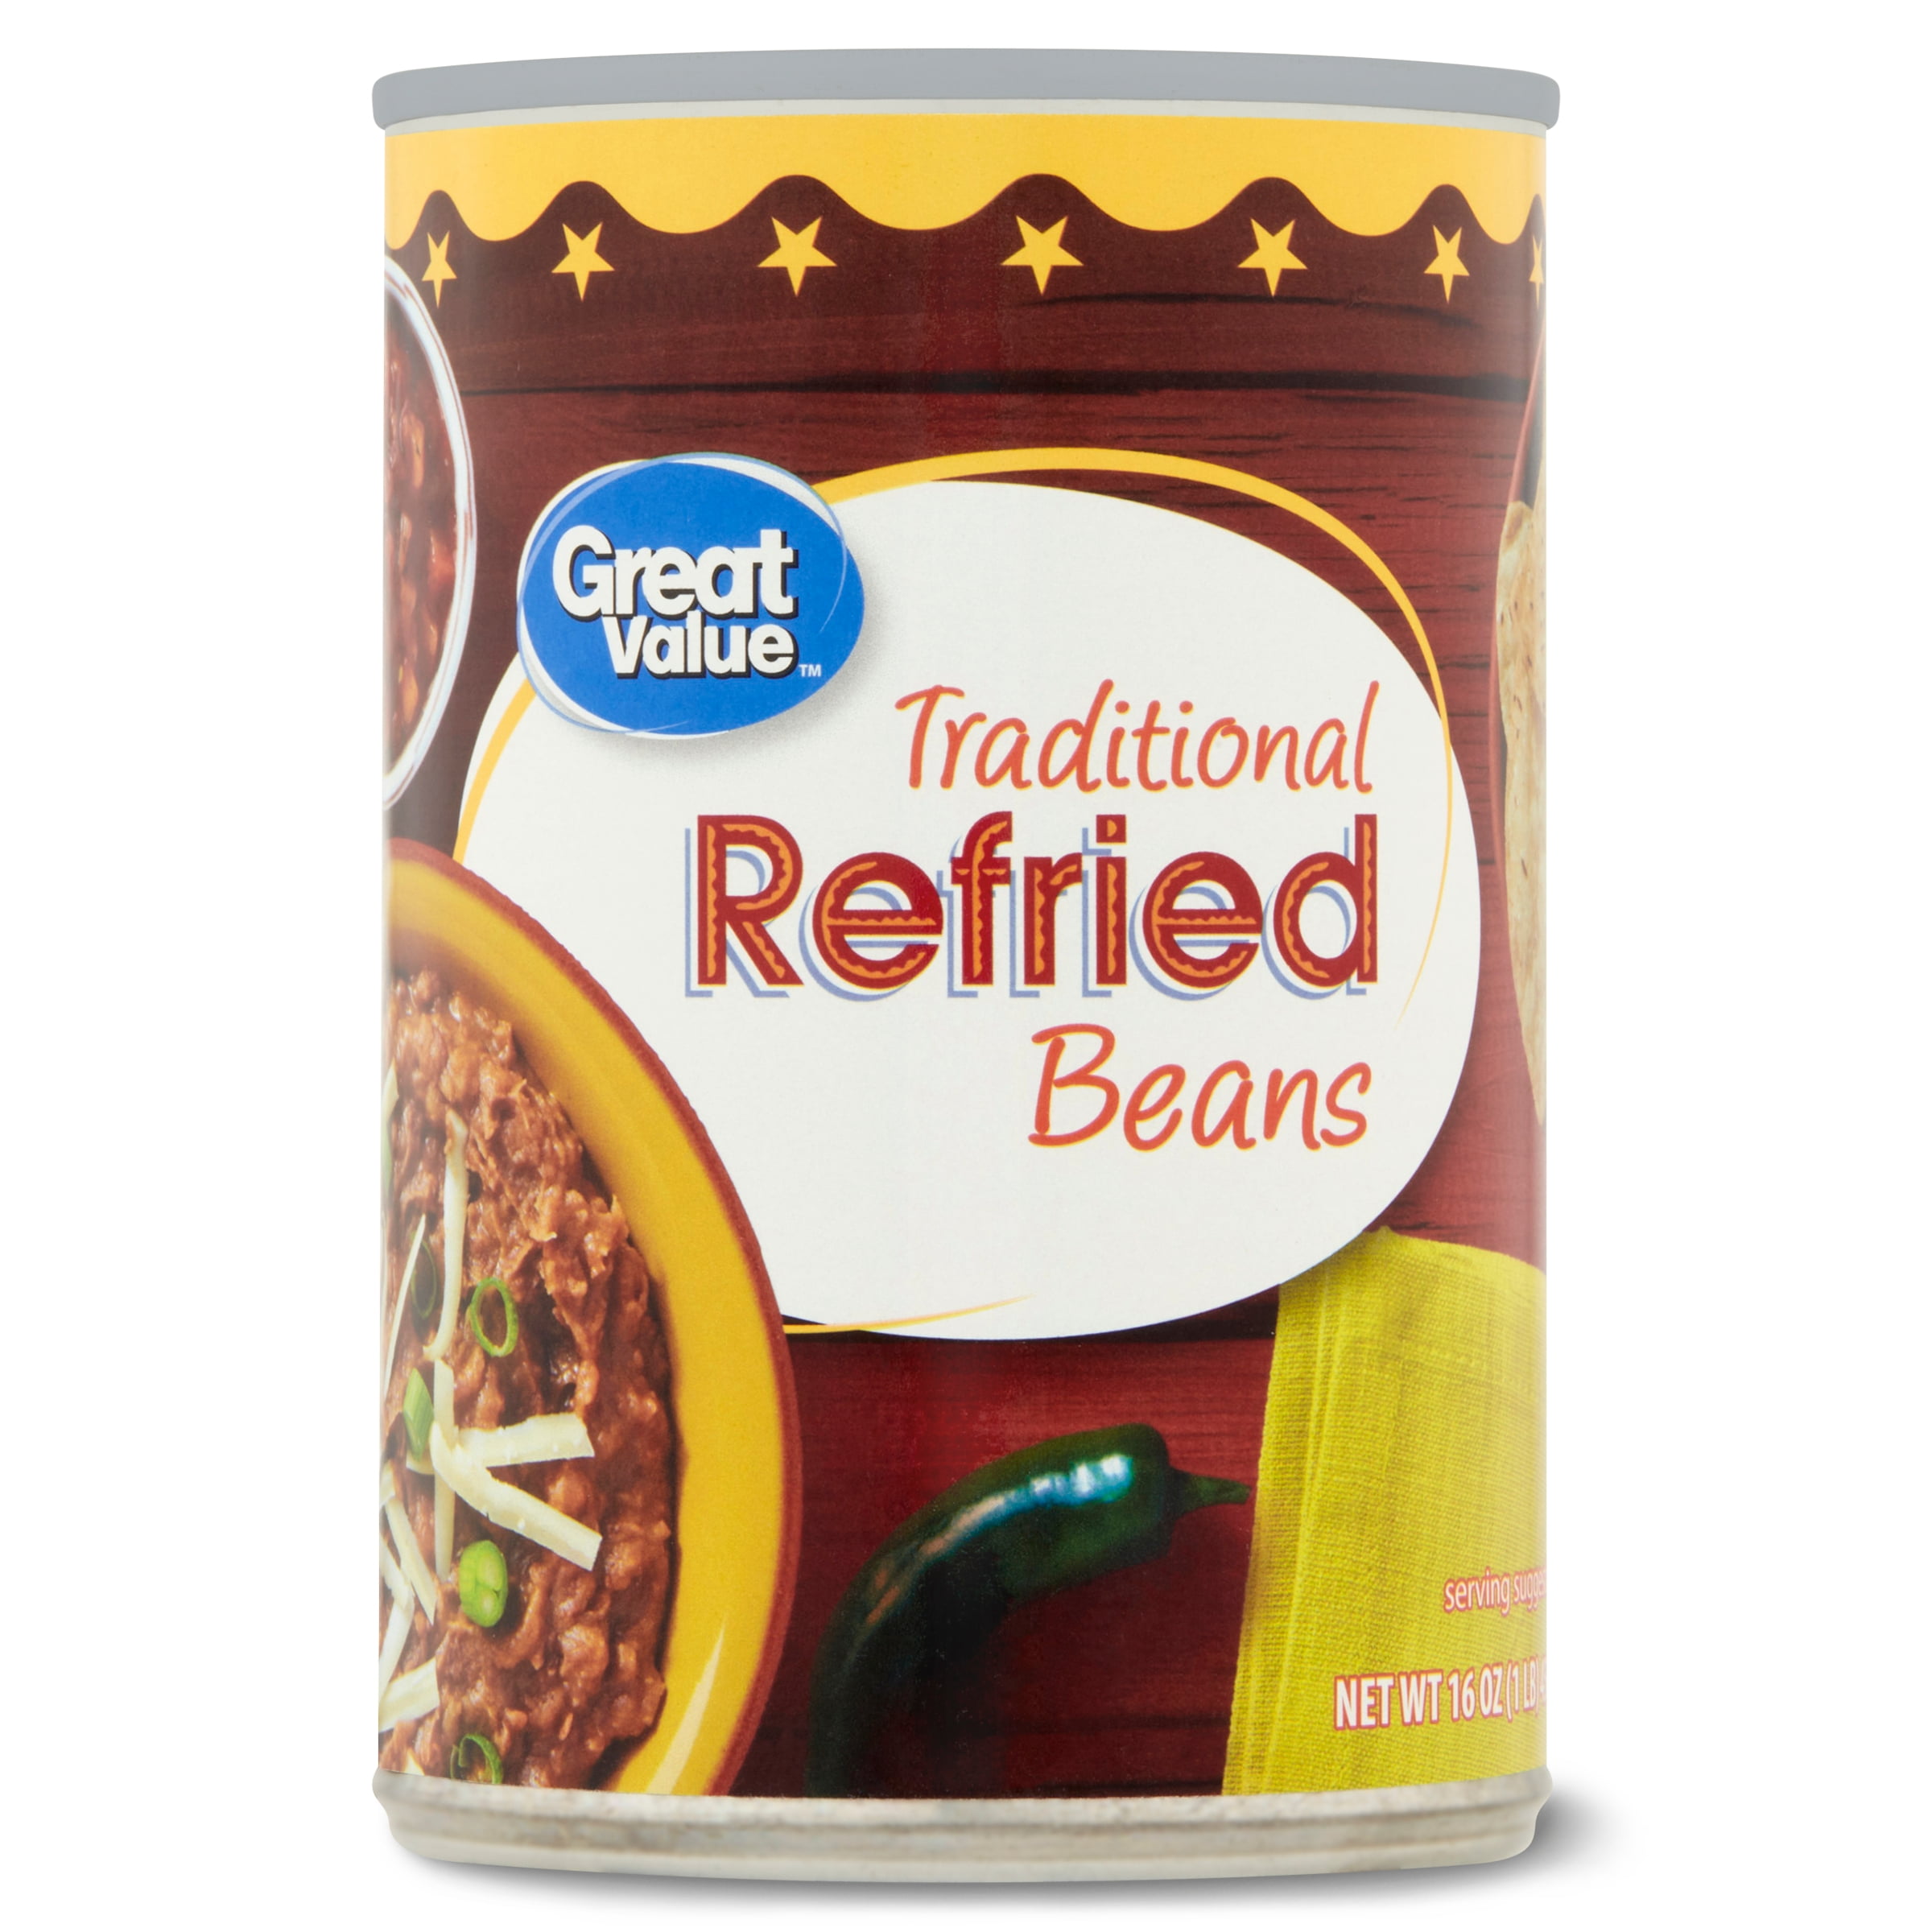 Great Value Traditional Refried Beans, 16 Oz